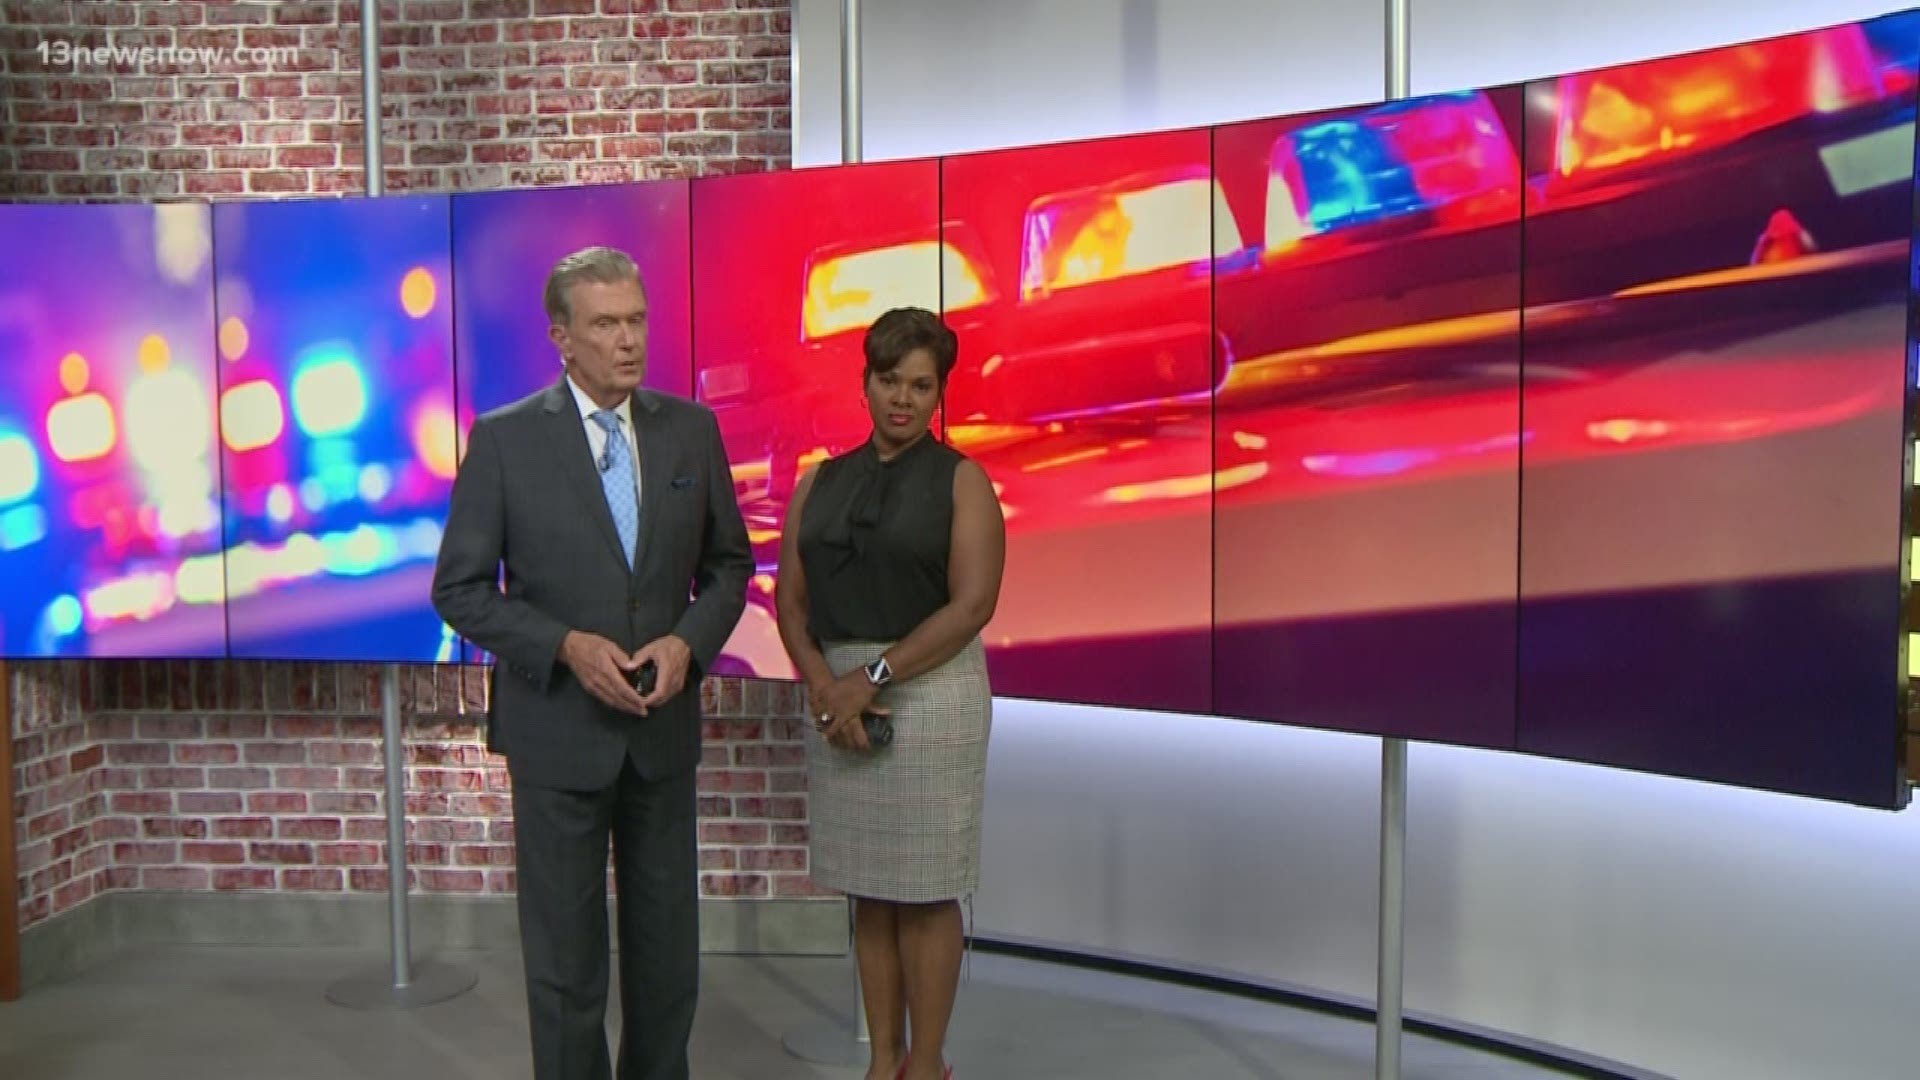 13News Now top headlines at 11 p.m. with Nicole Livas and David Alan for September 11.